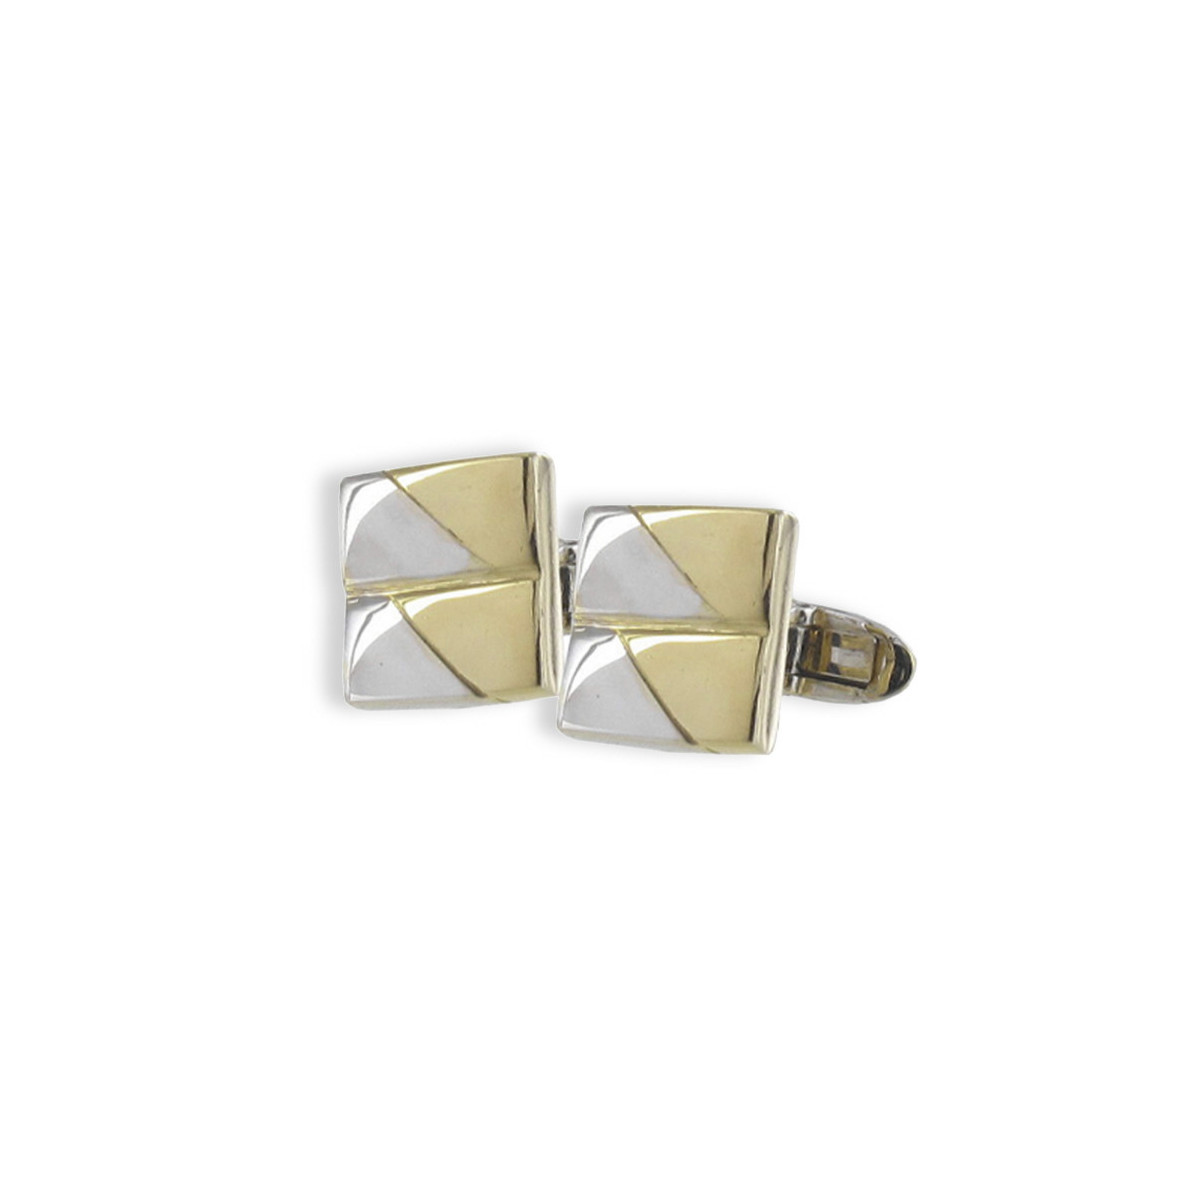 WHITE AND YELLOW GOLD SQUARE CUFFLINKS